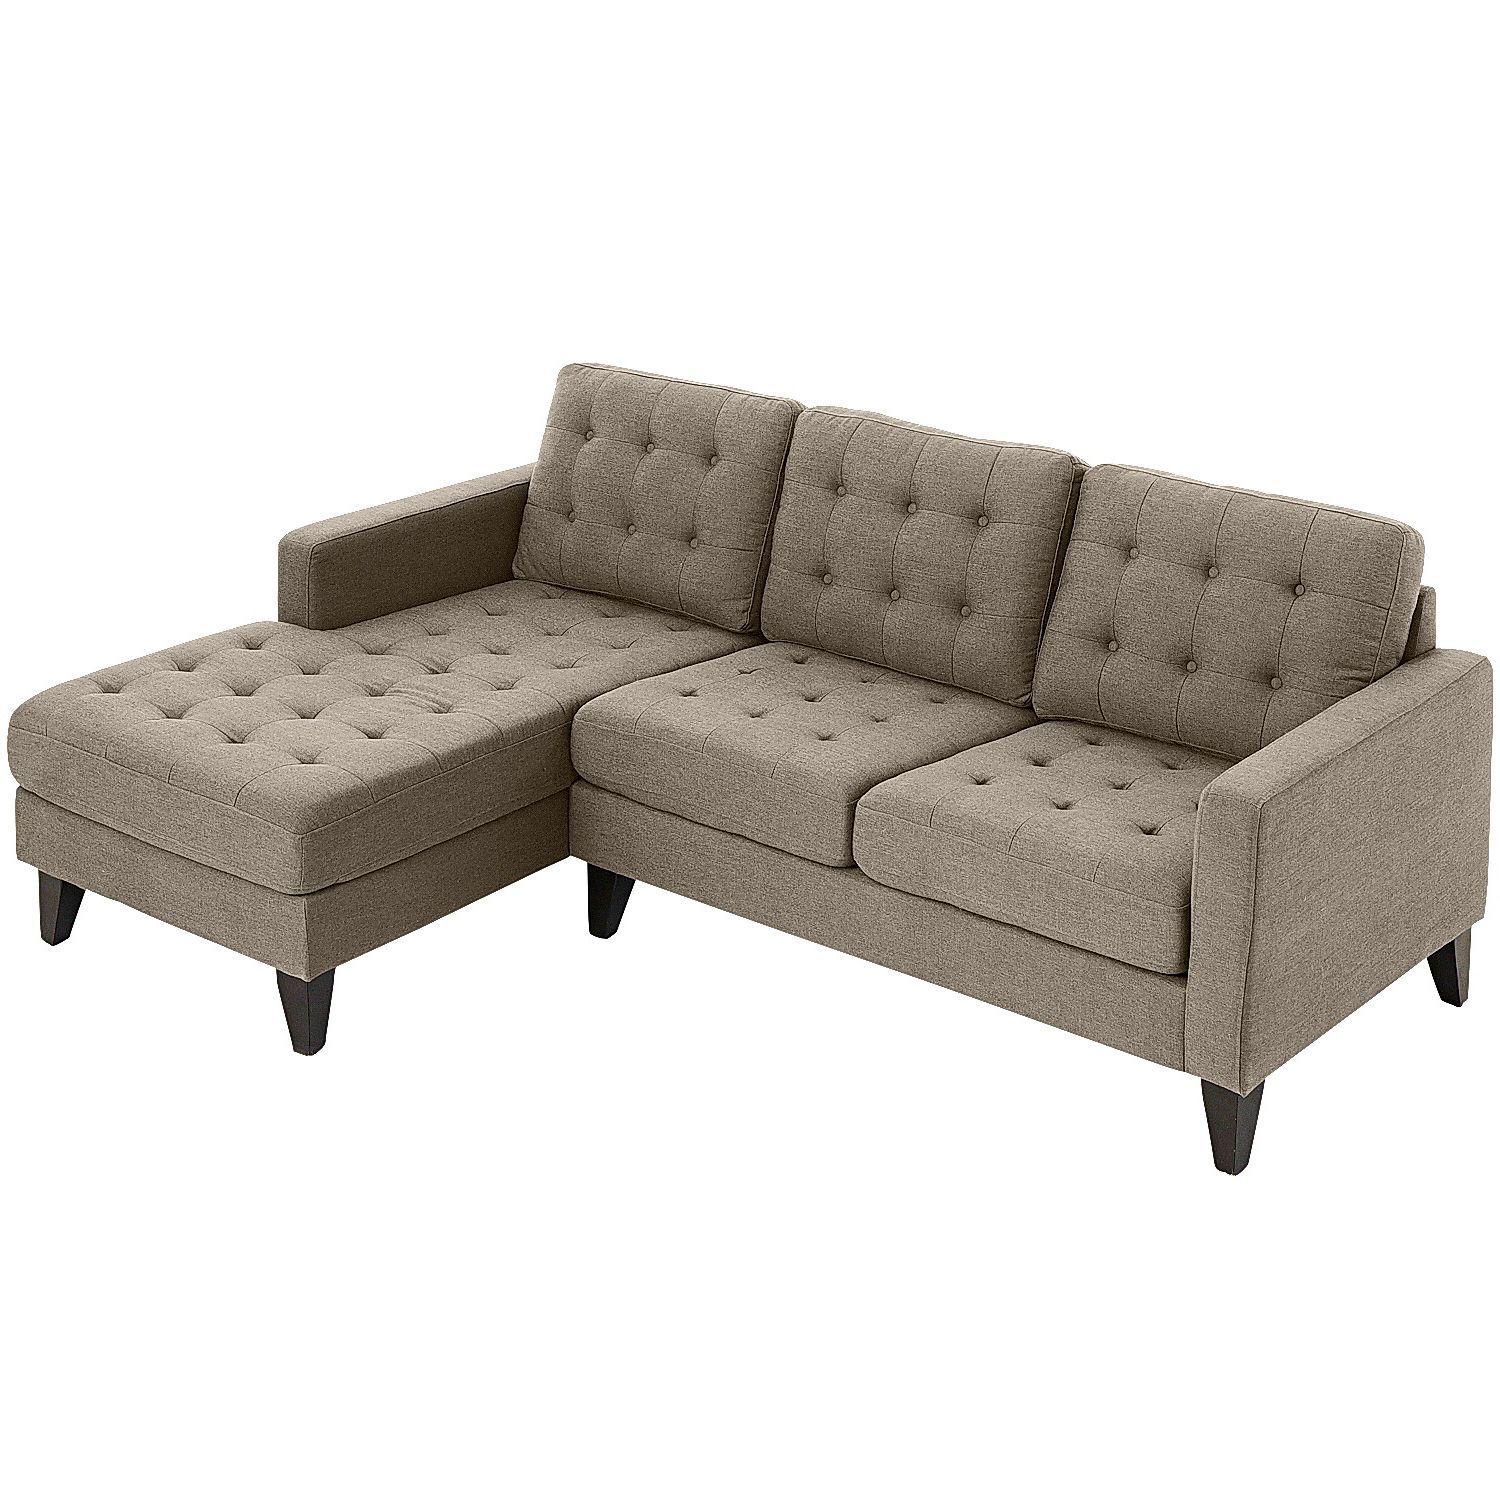 Nyle Putty 2 Piece Left Arm Chaise Sectional | Living Room In Element Right Side Chaise Sectional Sofas In Dark Gray Linen And Walnut Legs (View 9 of 15)